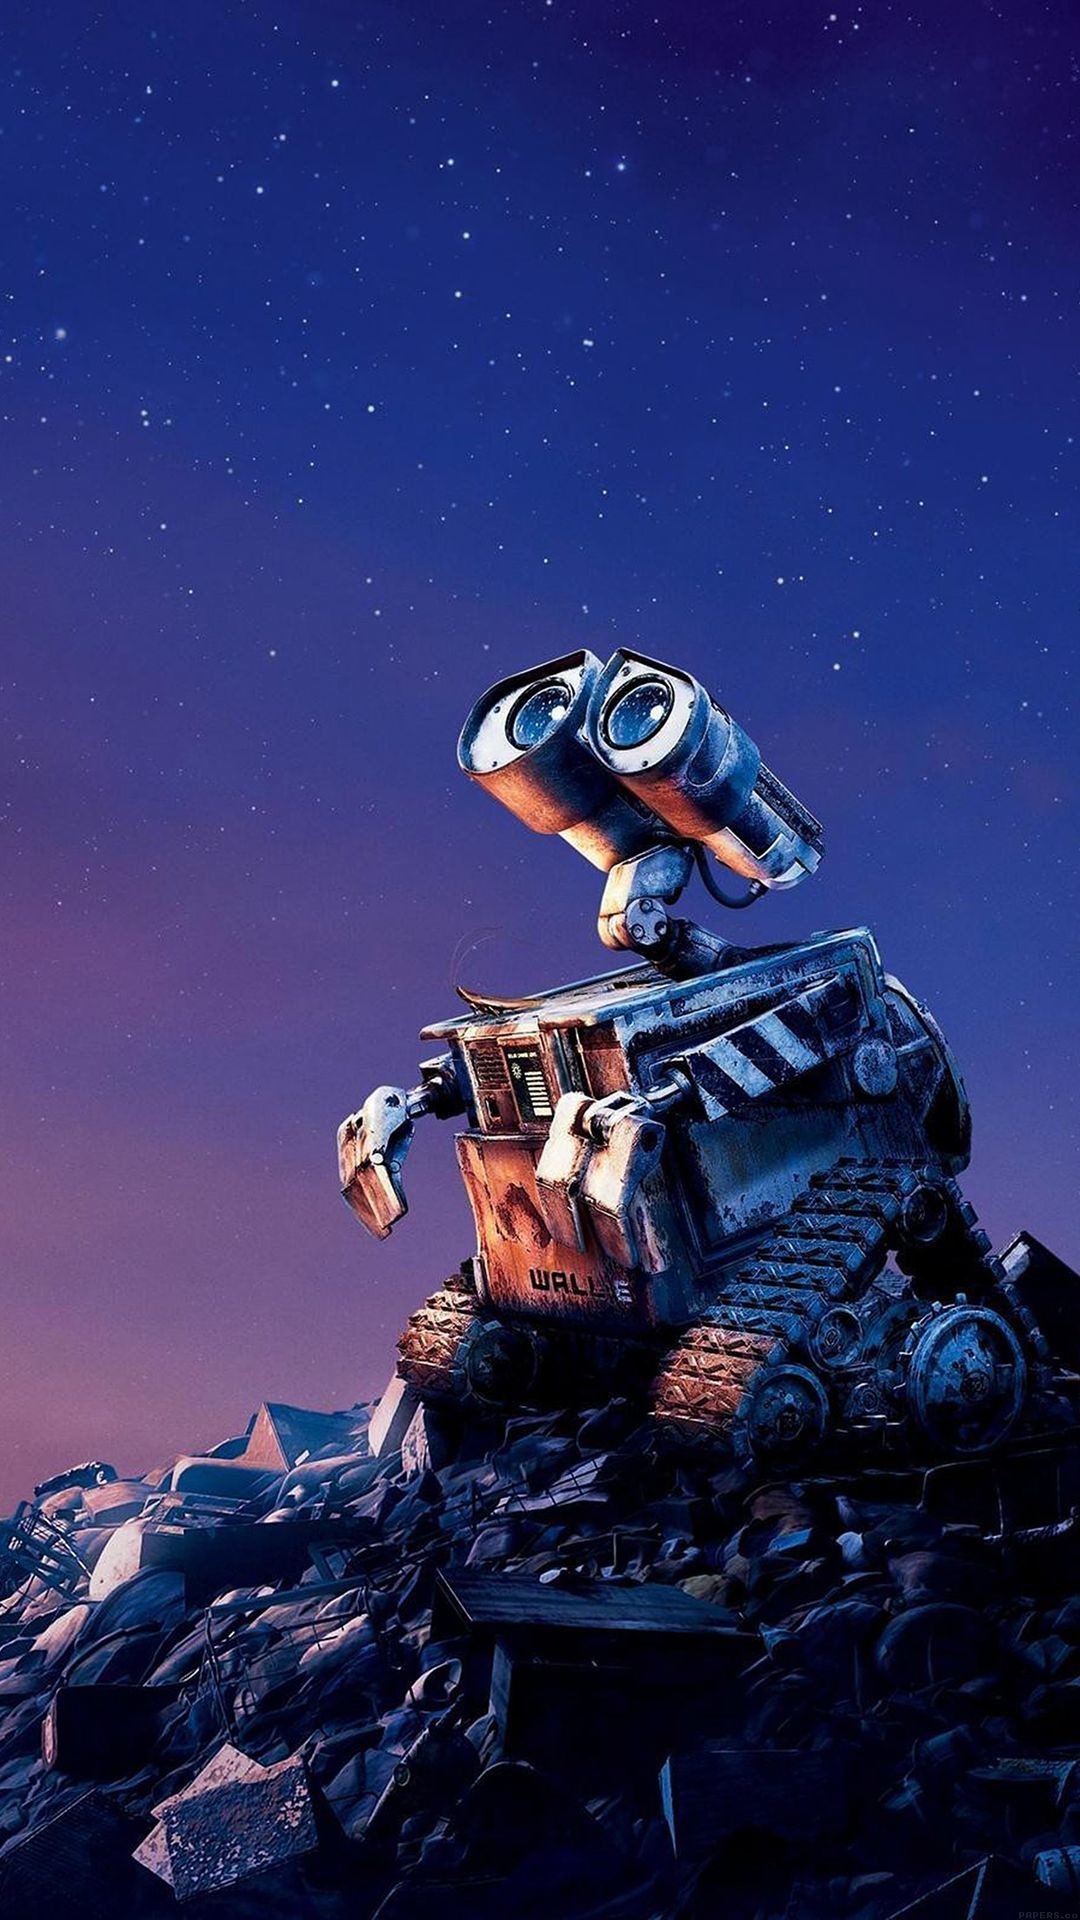 1080x1920 Tap image for more iPhone Disney wallpaper! Wall E Disney want go home - @